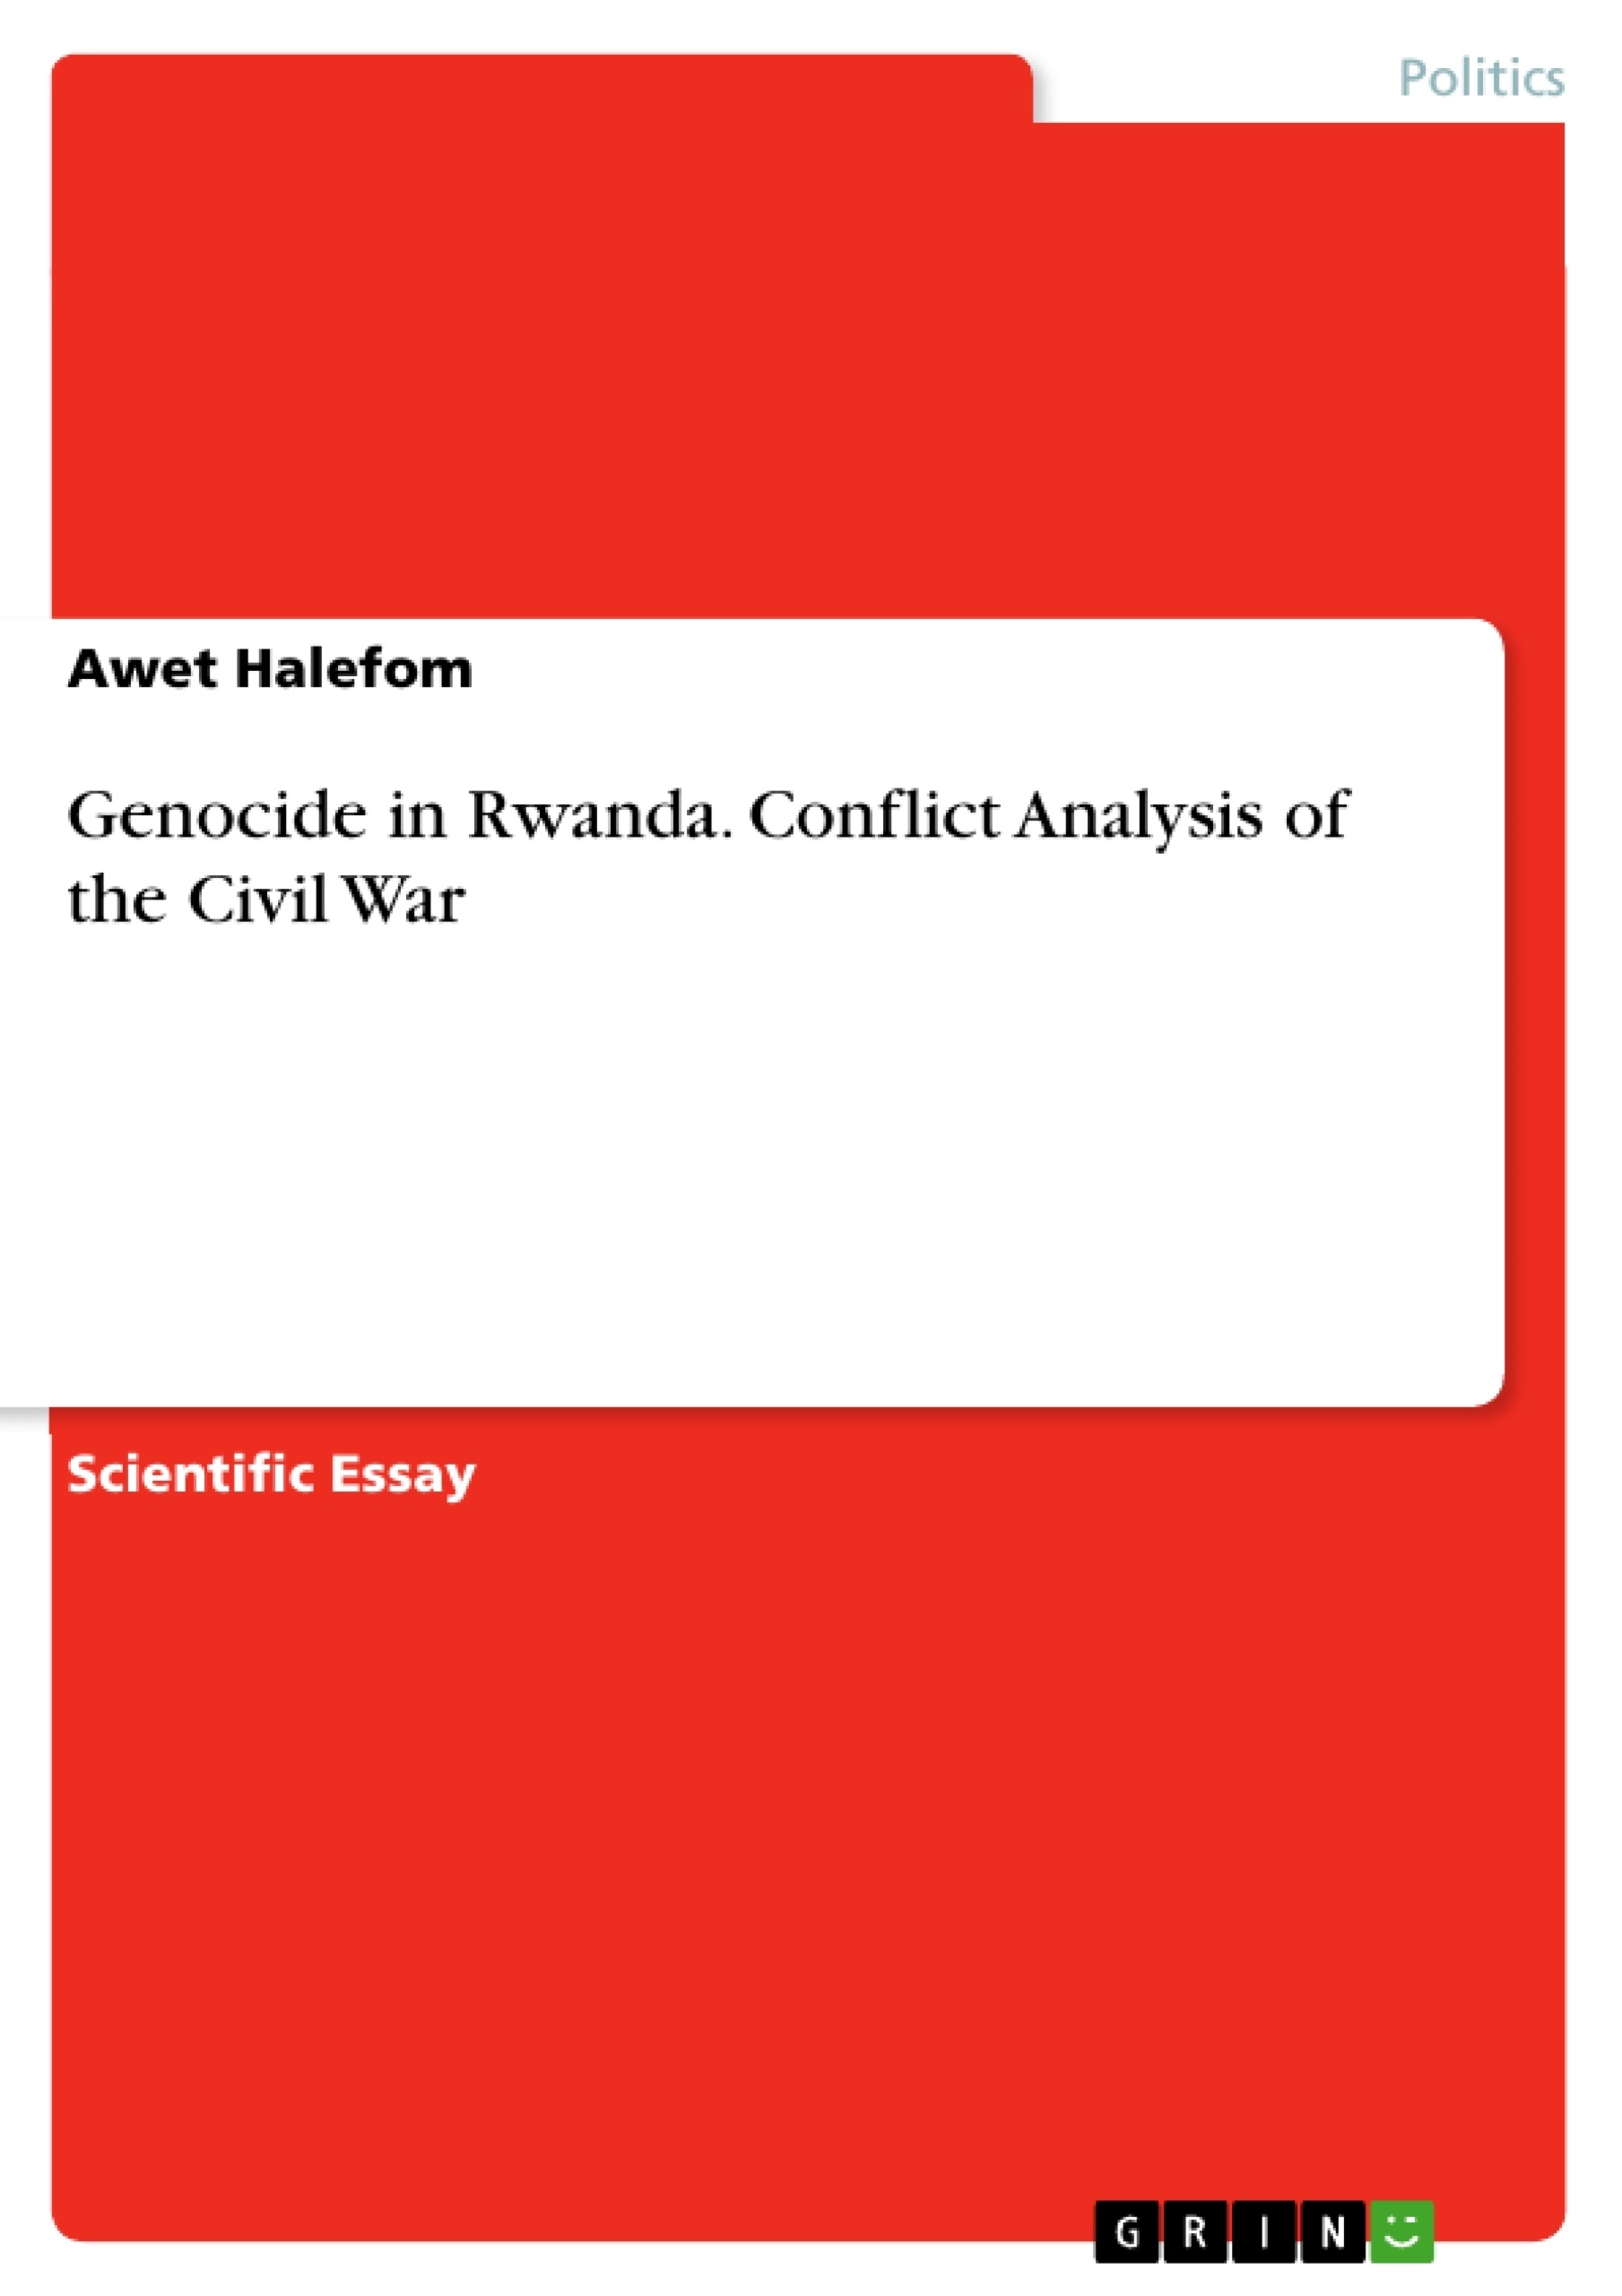 Title: Genocide in Rwanda. Conflict Analysis of the Civil War